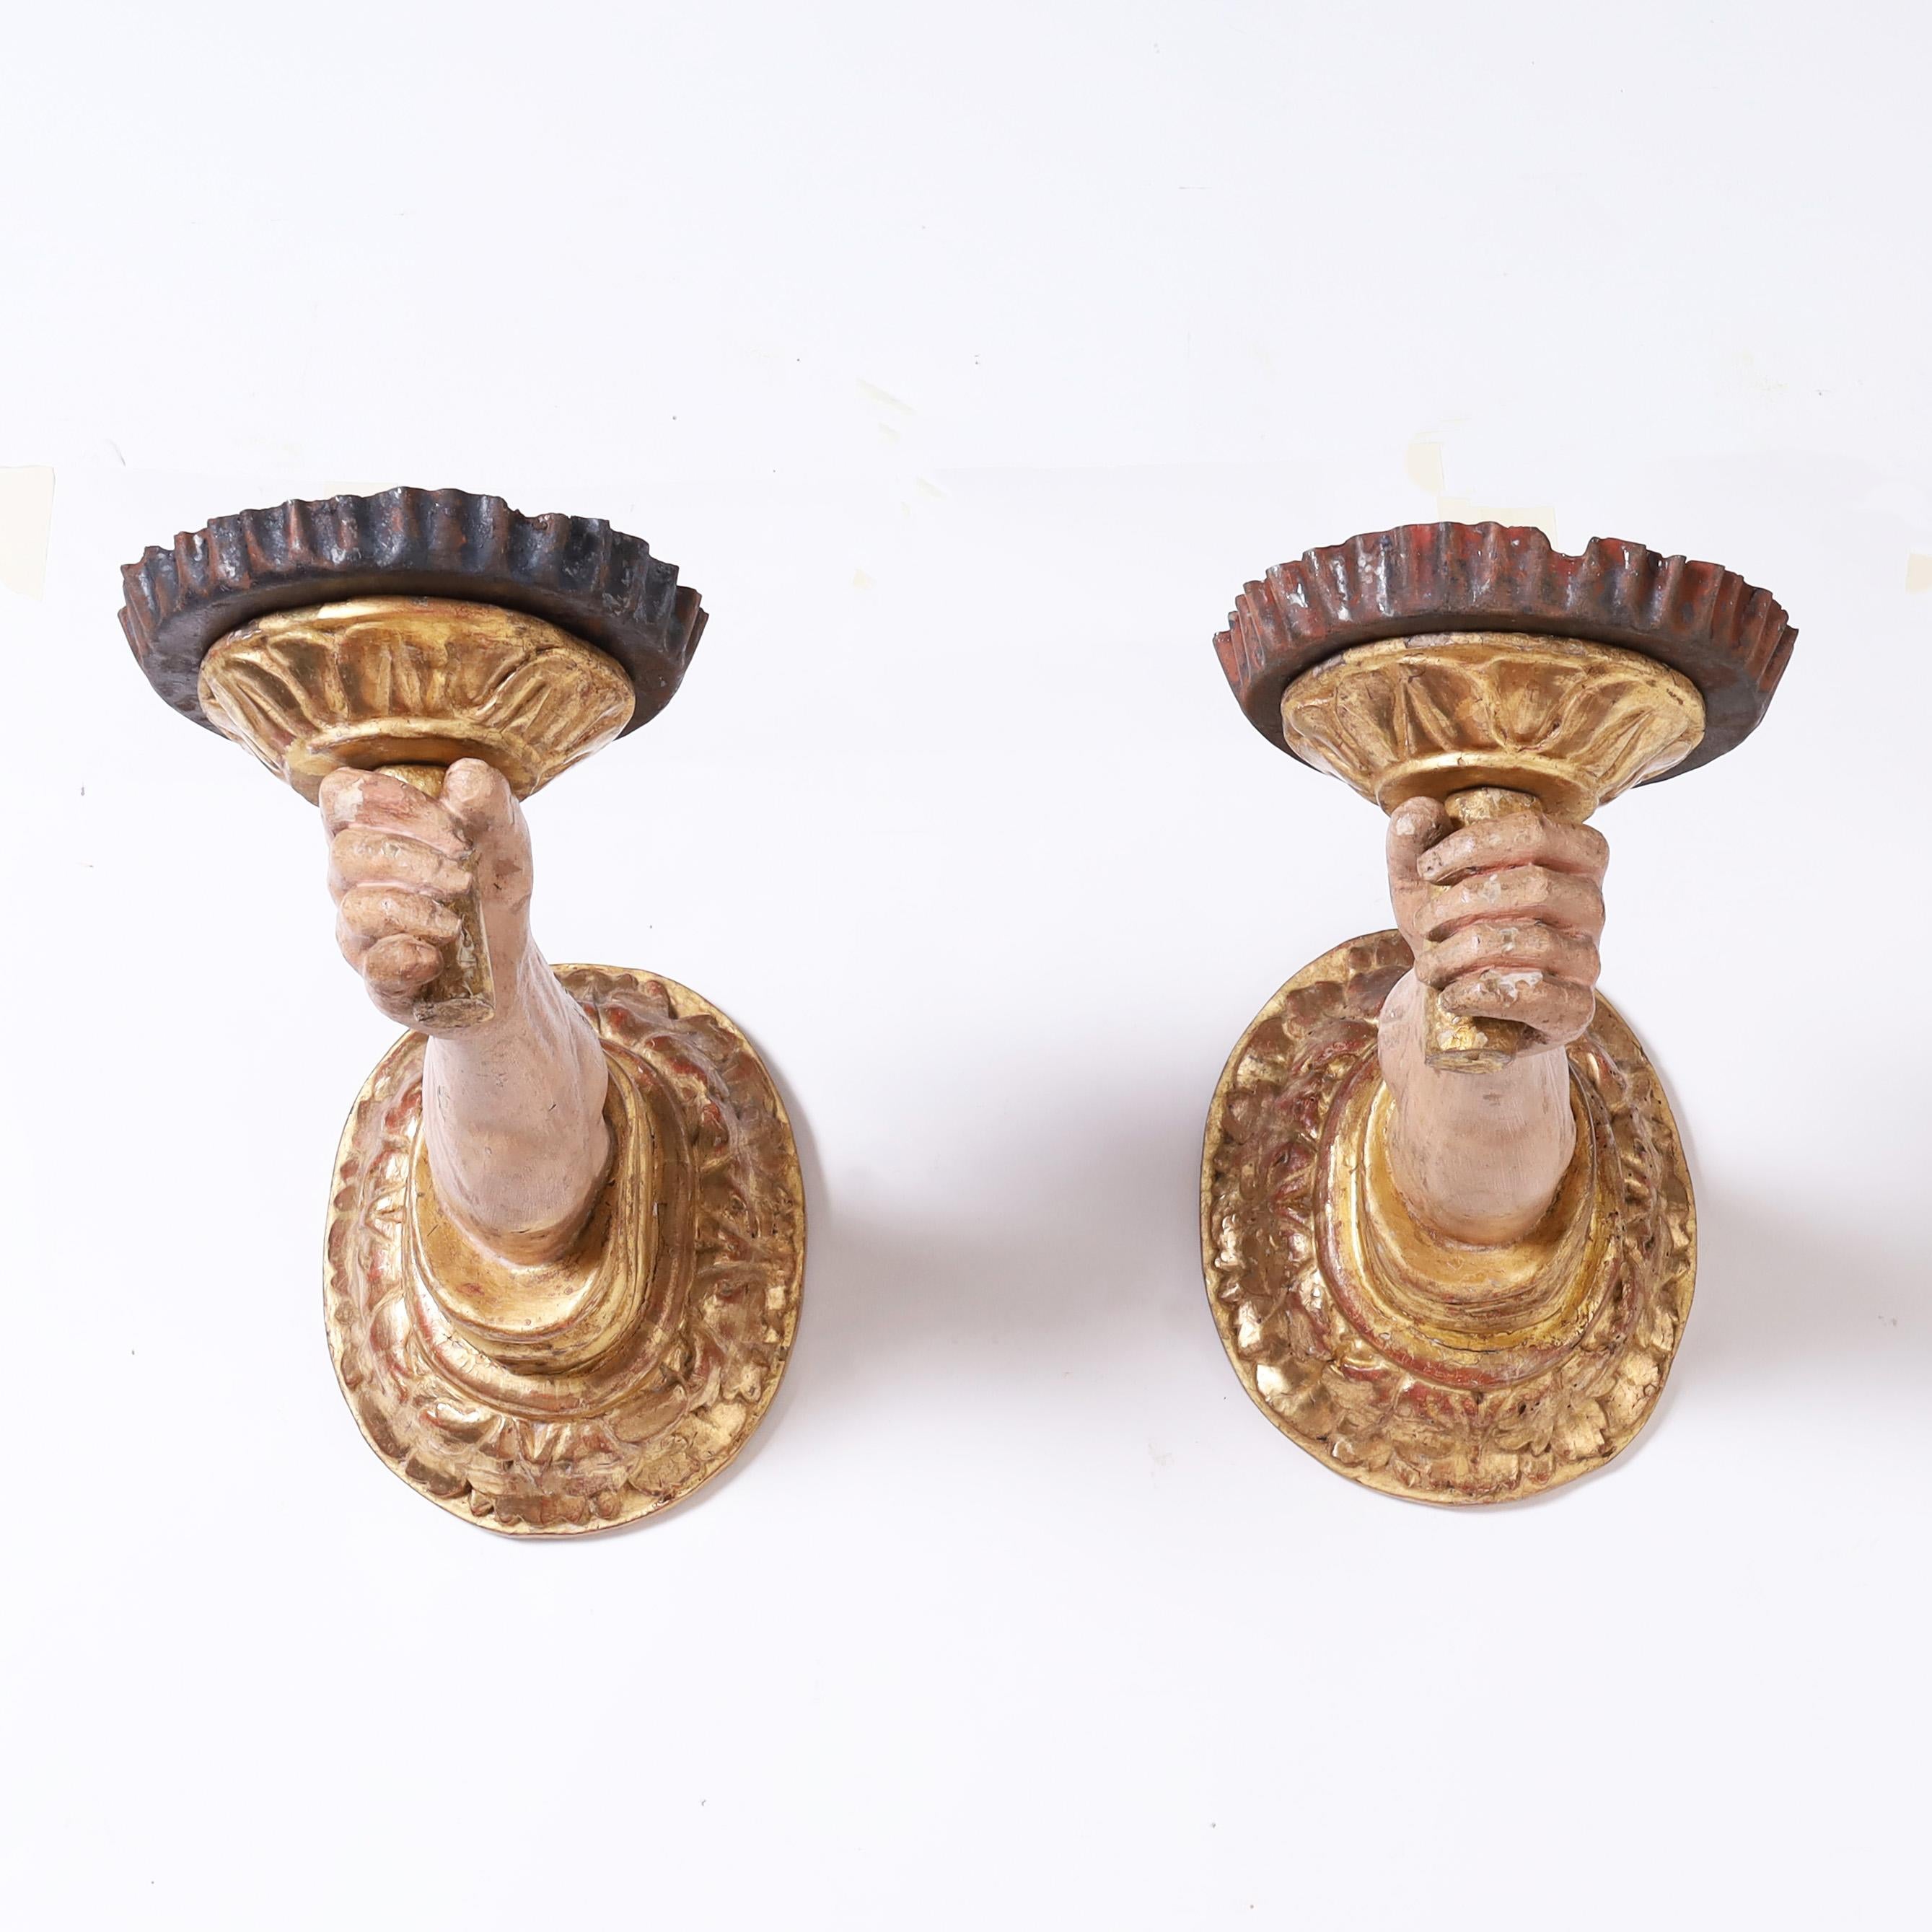 Rare and remarkable pair of 18th century French wall sconce candle holders hand carved depicting hardworking peasant hands in service, protruding from carved, primed and gilt classical back plates, and holding carved wood and metal candle cups.